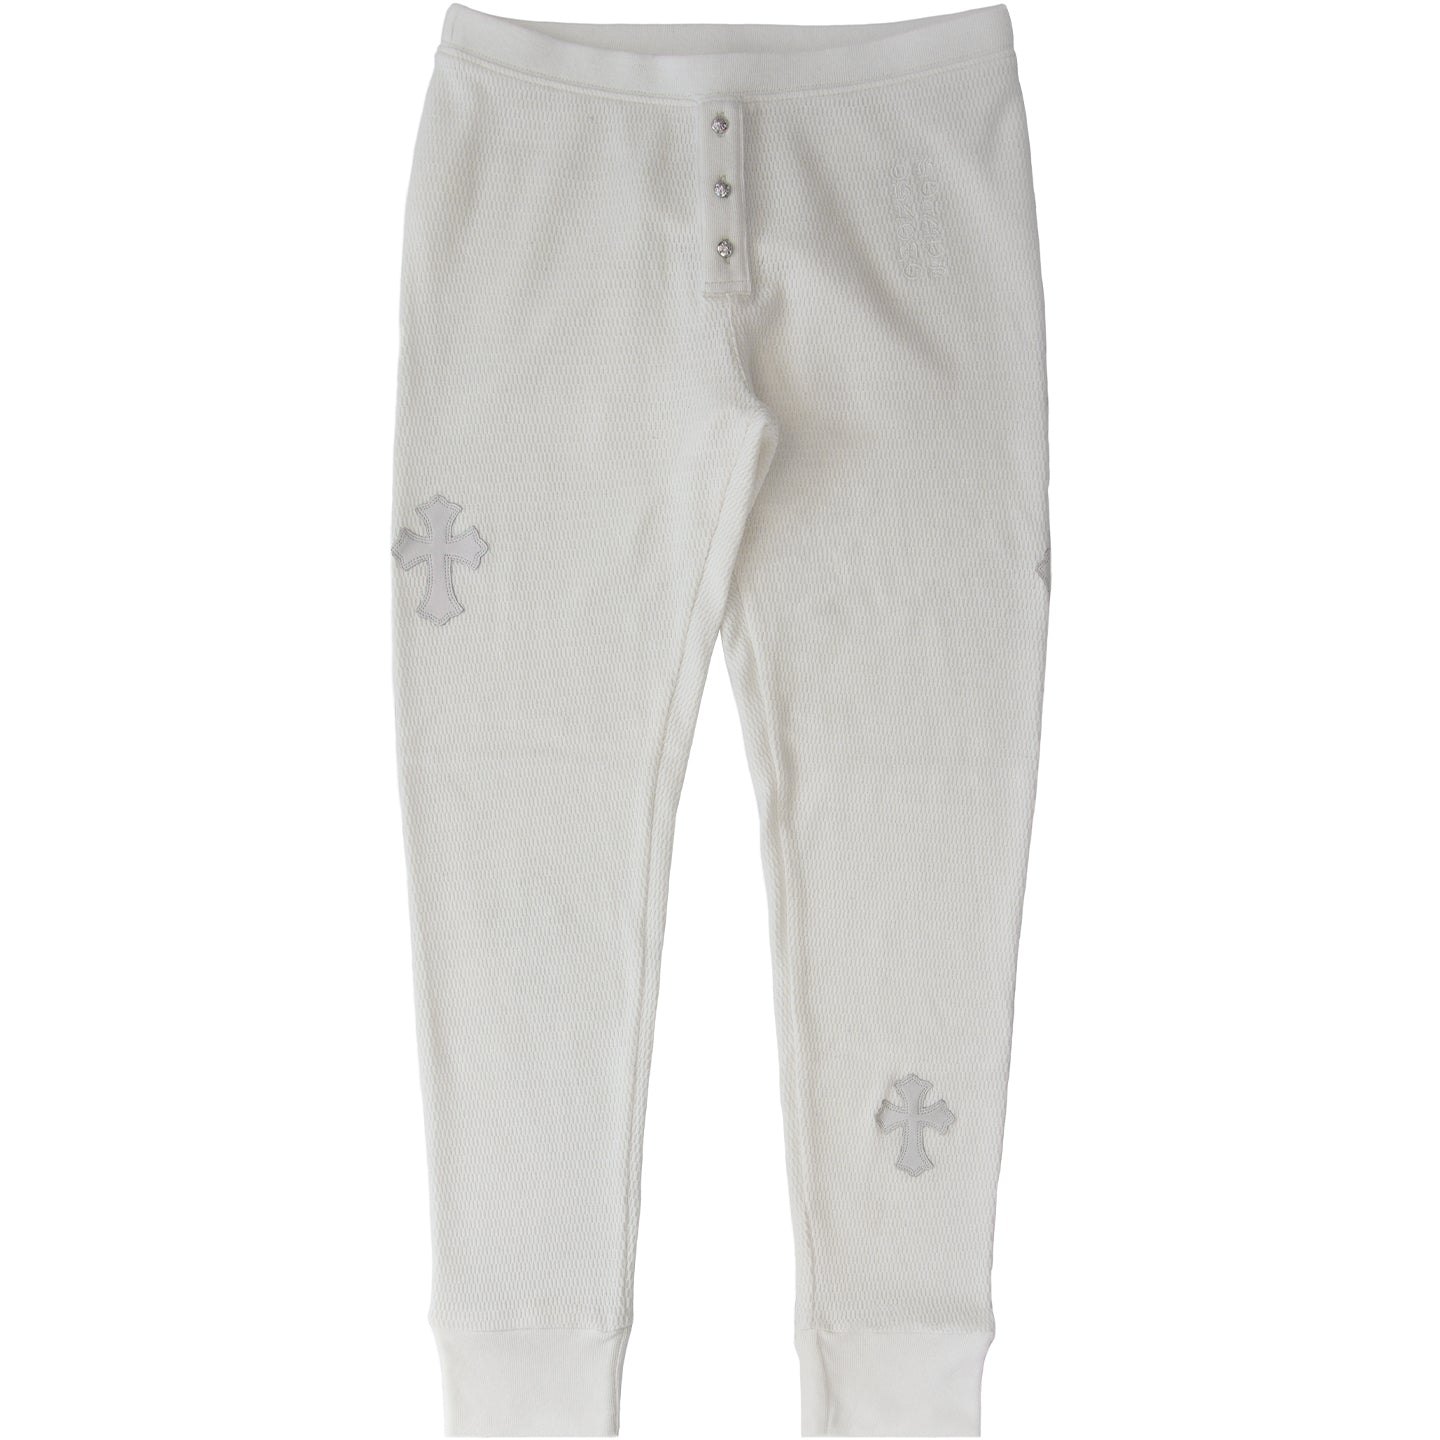 CHROME HEARTS PATCHWORK THERMAL LEGGING